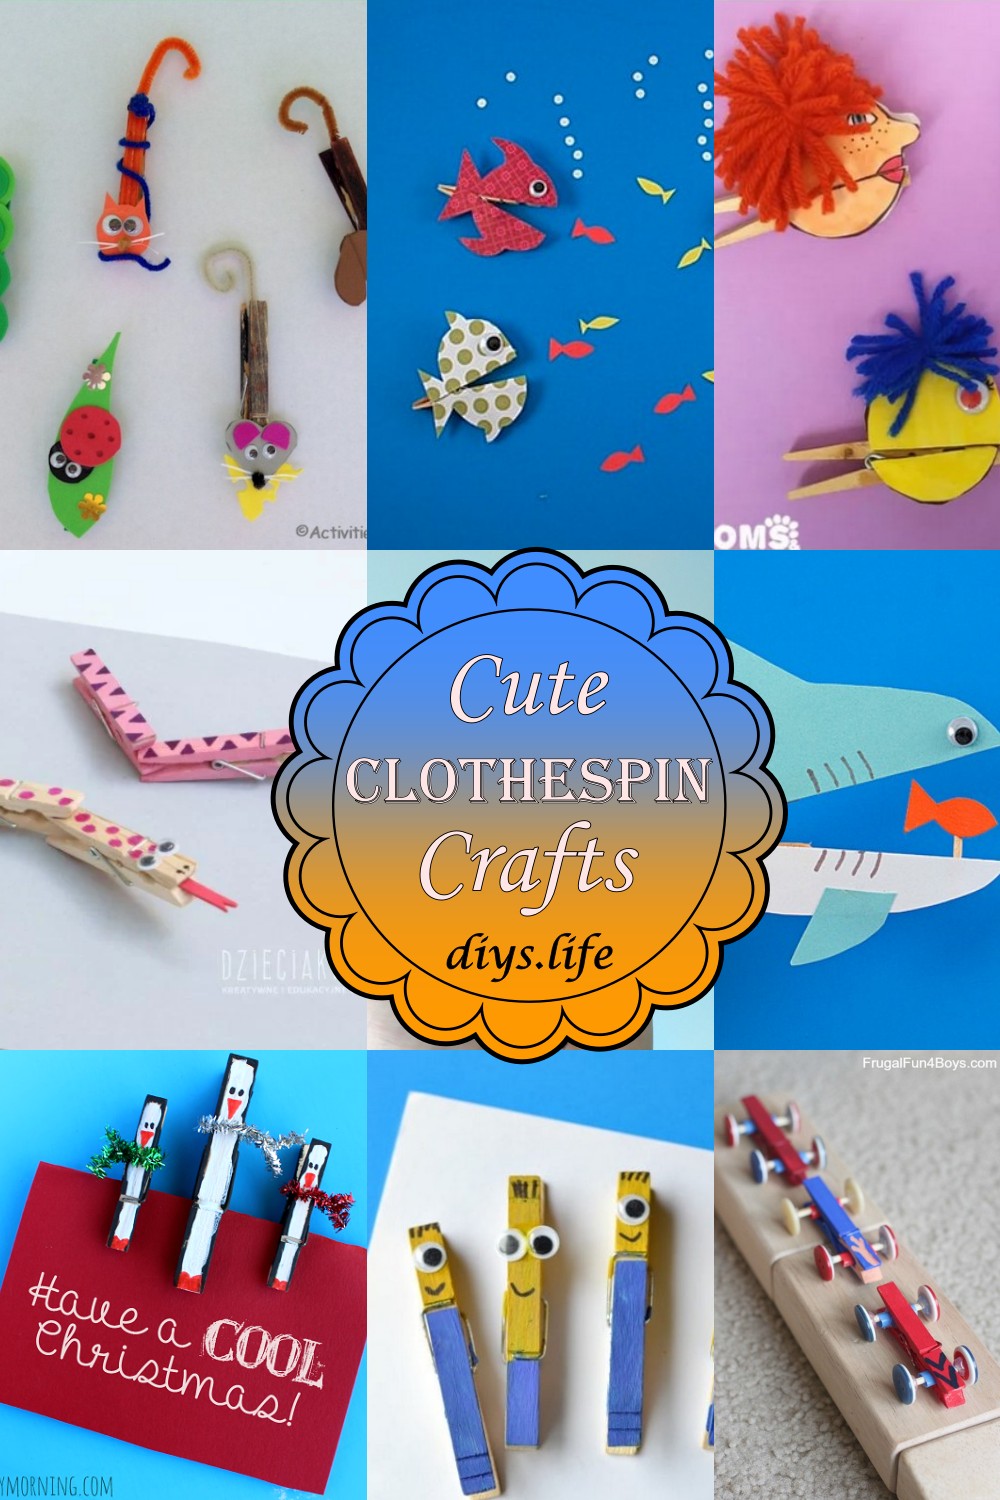 Cute Clothespin Crafts